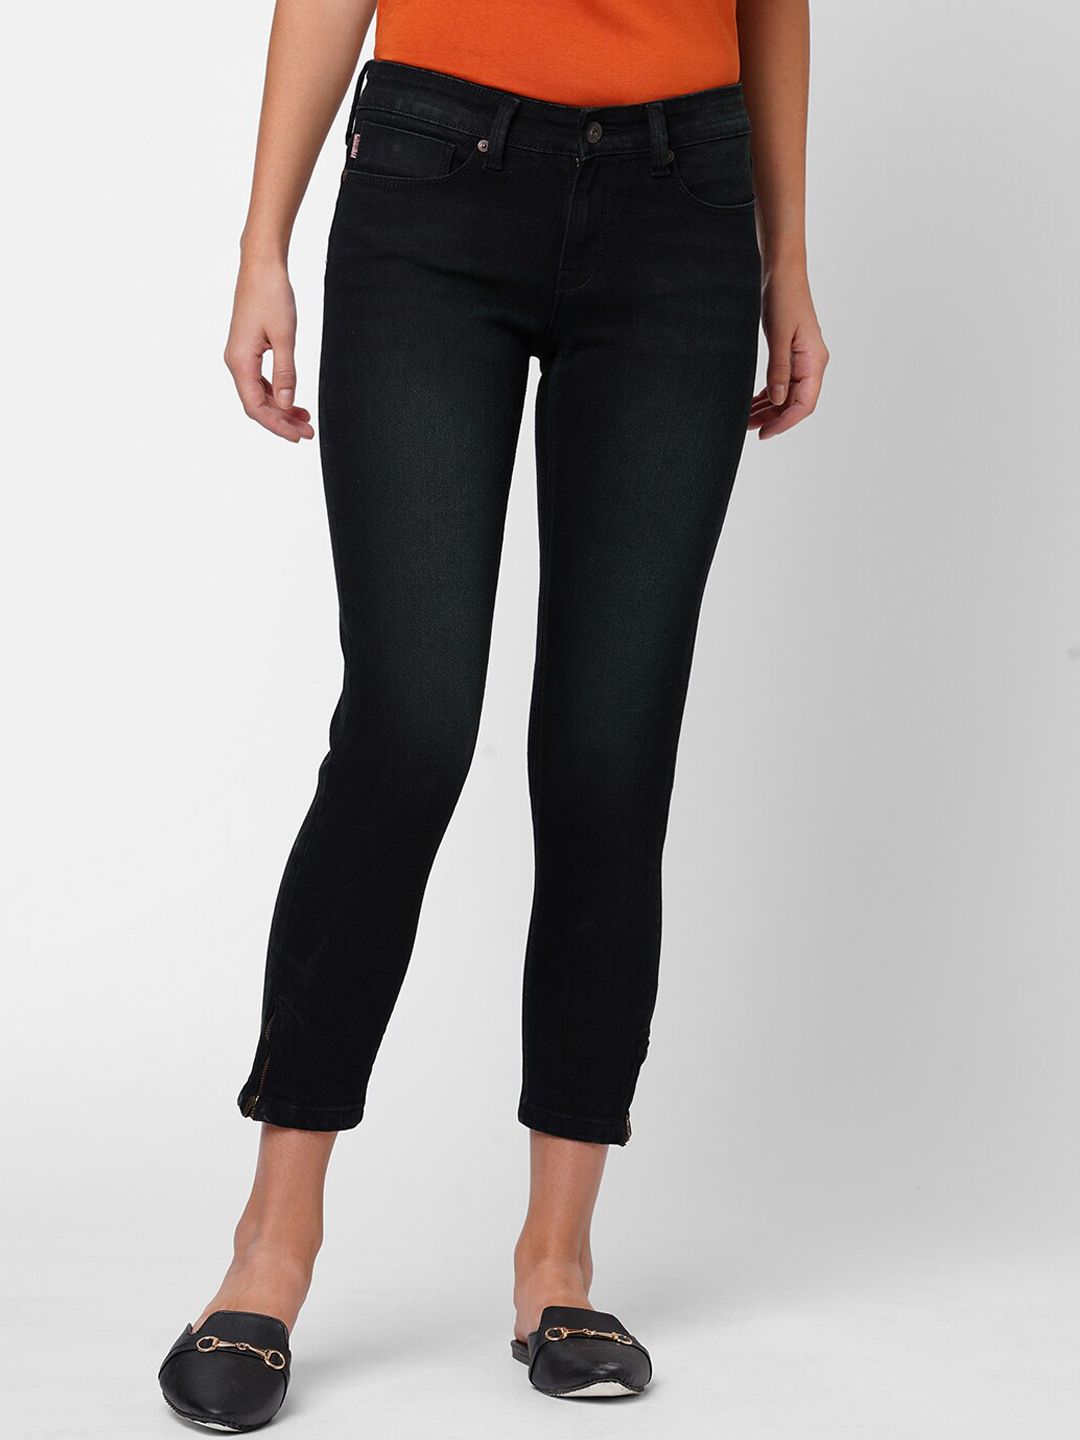 Pepe Jeans Women Black Skinny Fit Jeans Price in India